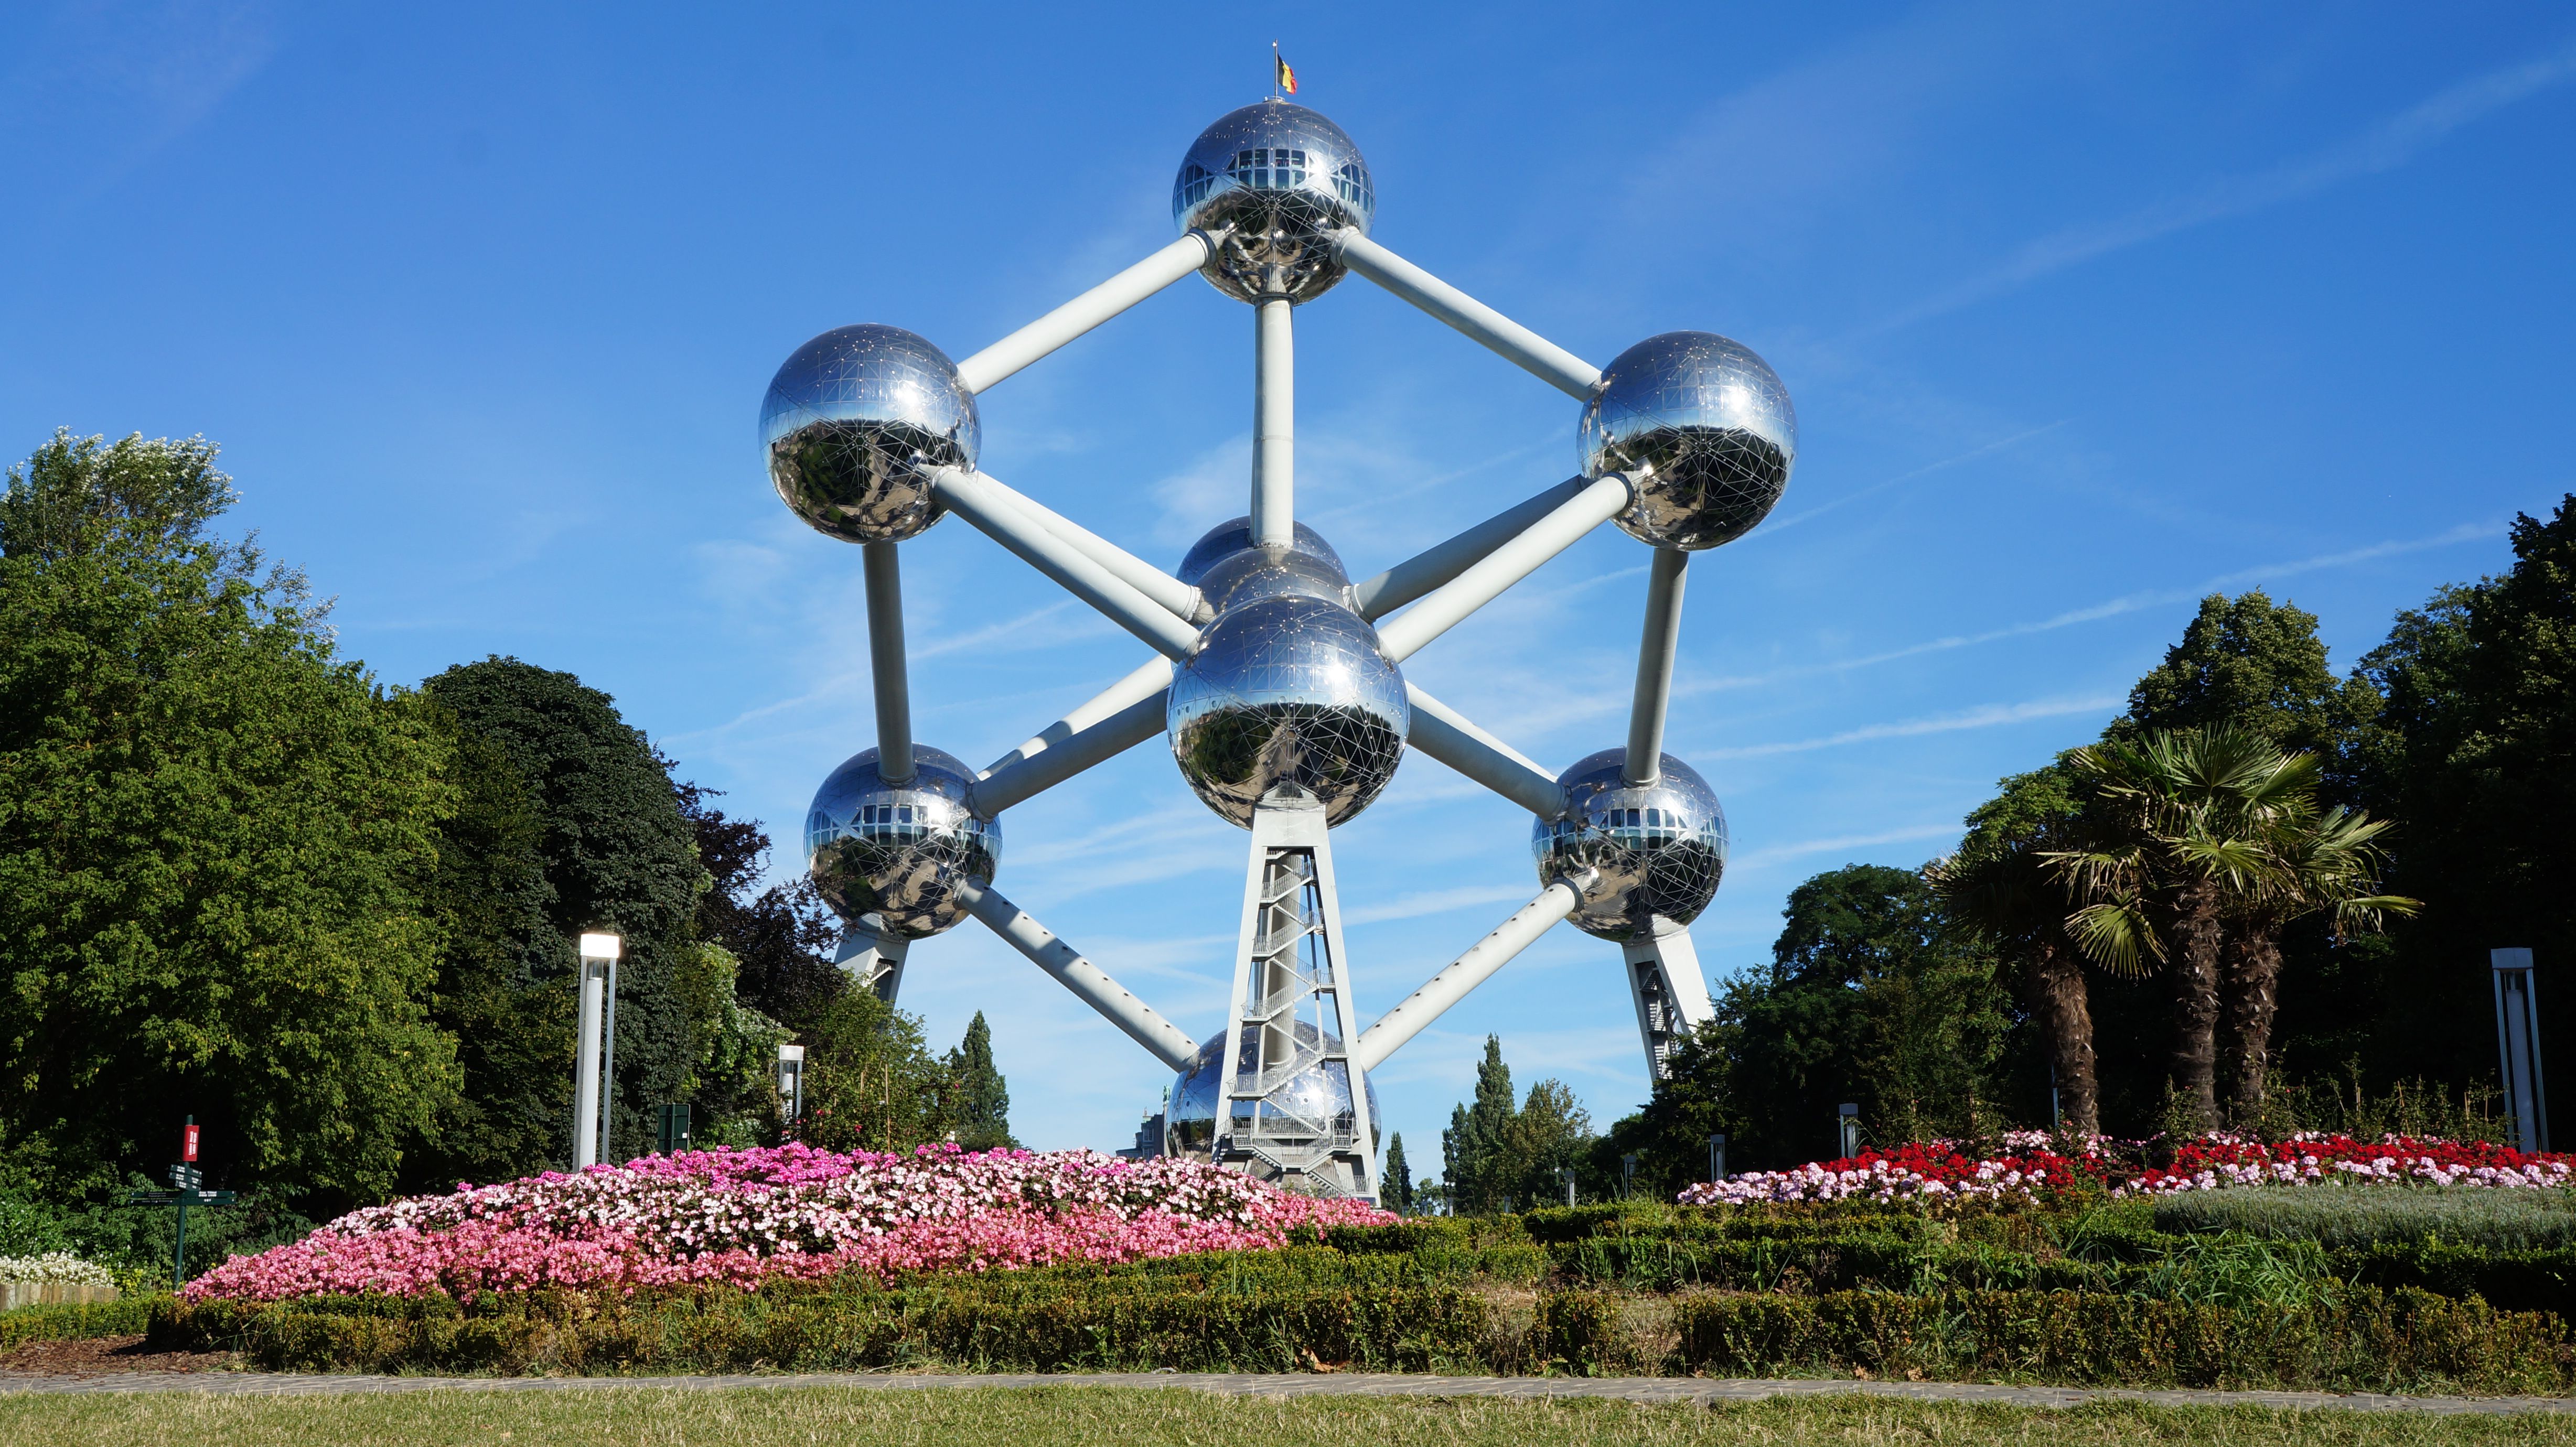 Image result for brussels atomium"